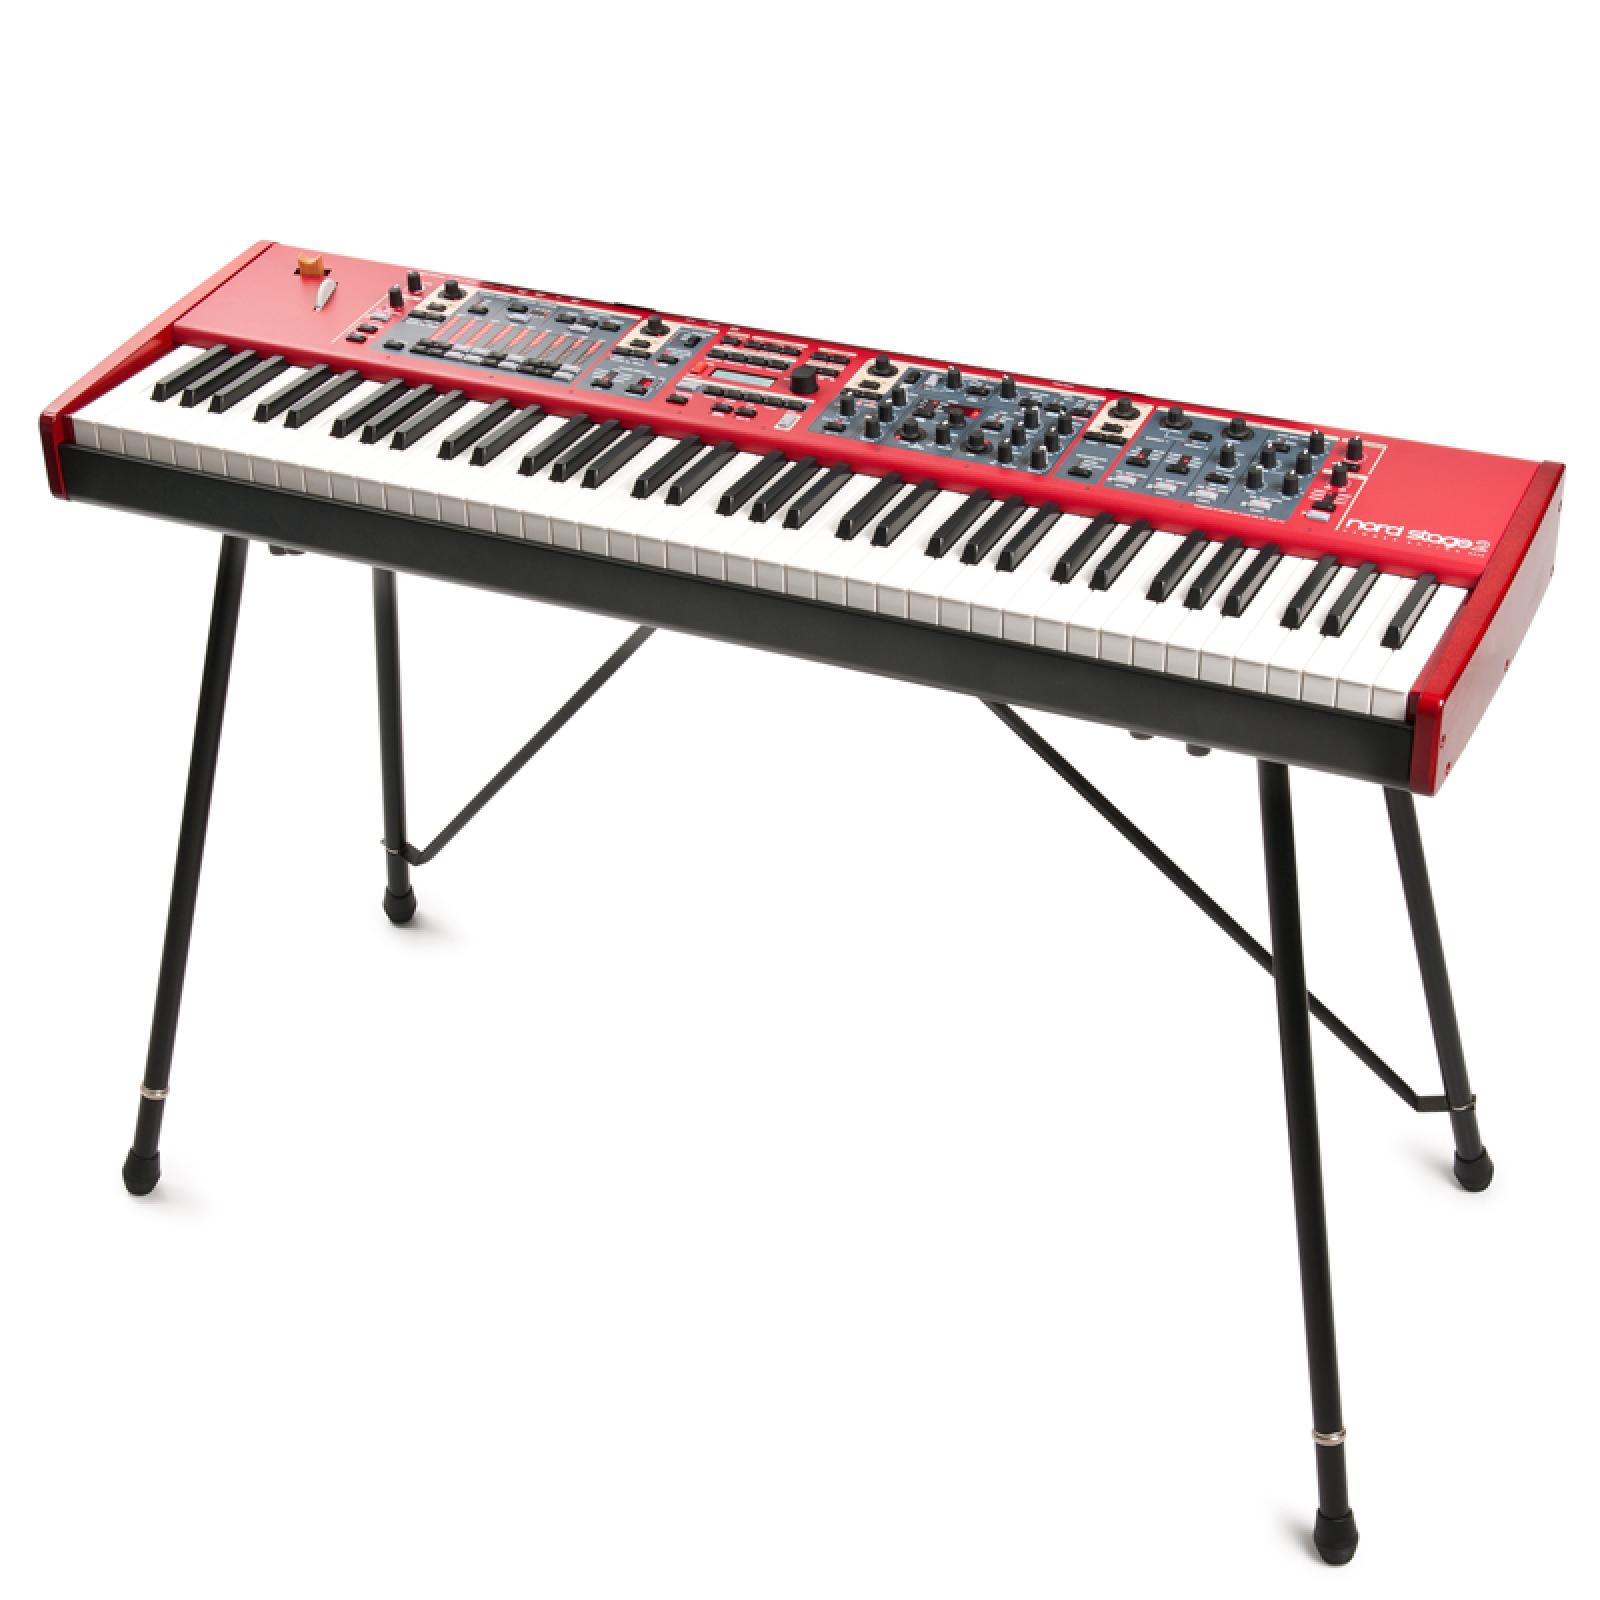 NORD KEYBOARD STAND